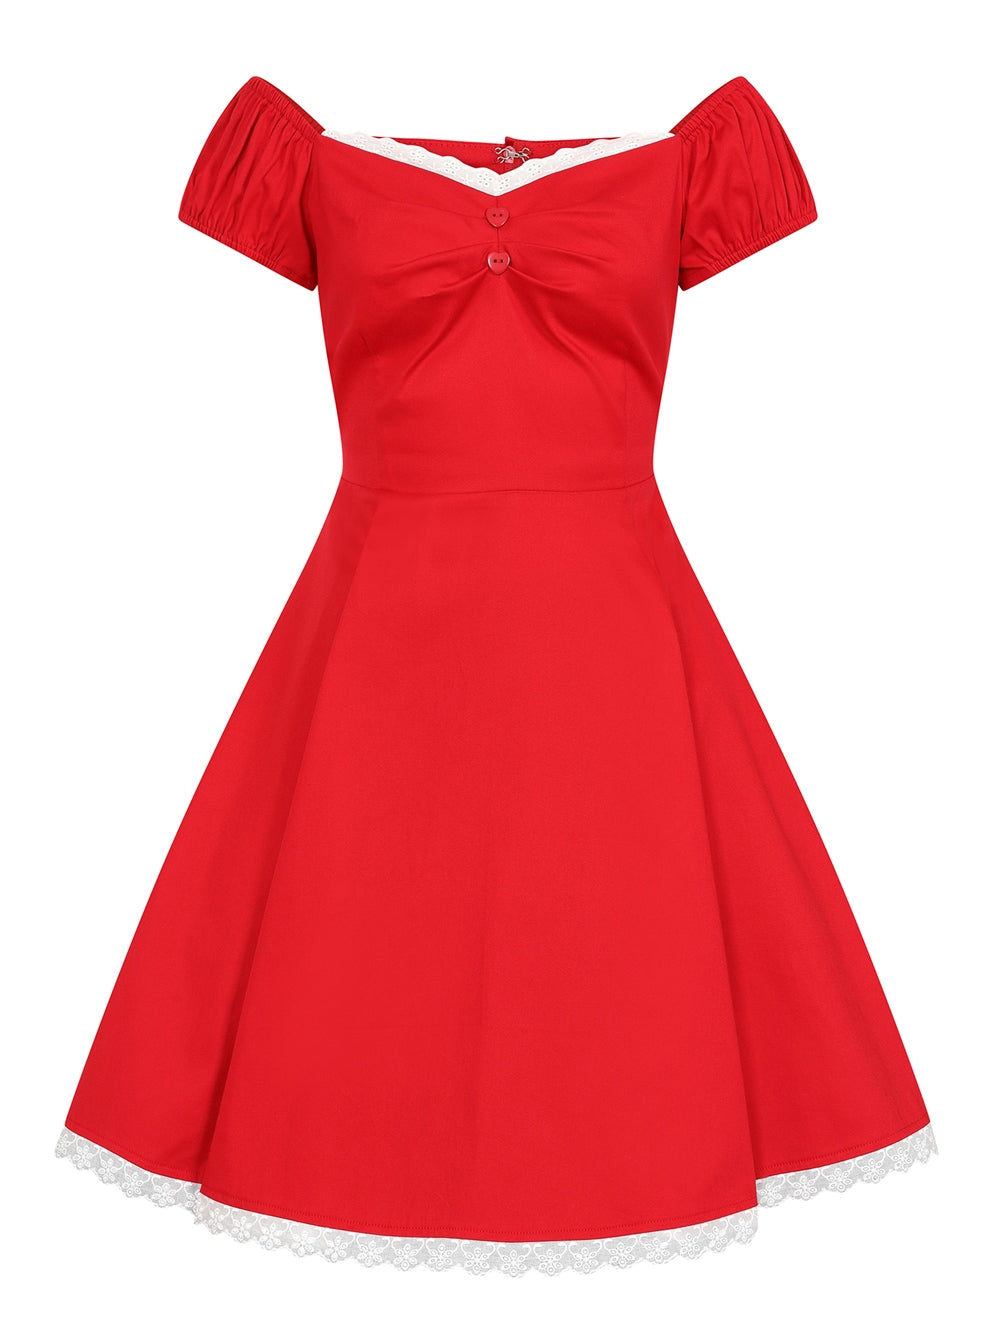 Collectif Dolores Sweetheart Mini Doll Dress cotton retro vintage 50s pinup pin-up swing dress Suzie's Bombshell Boutique